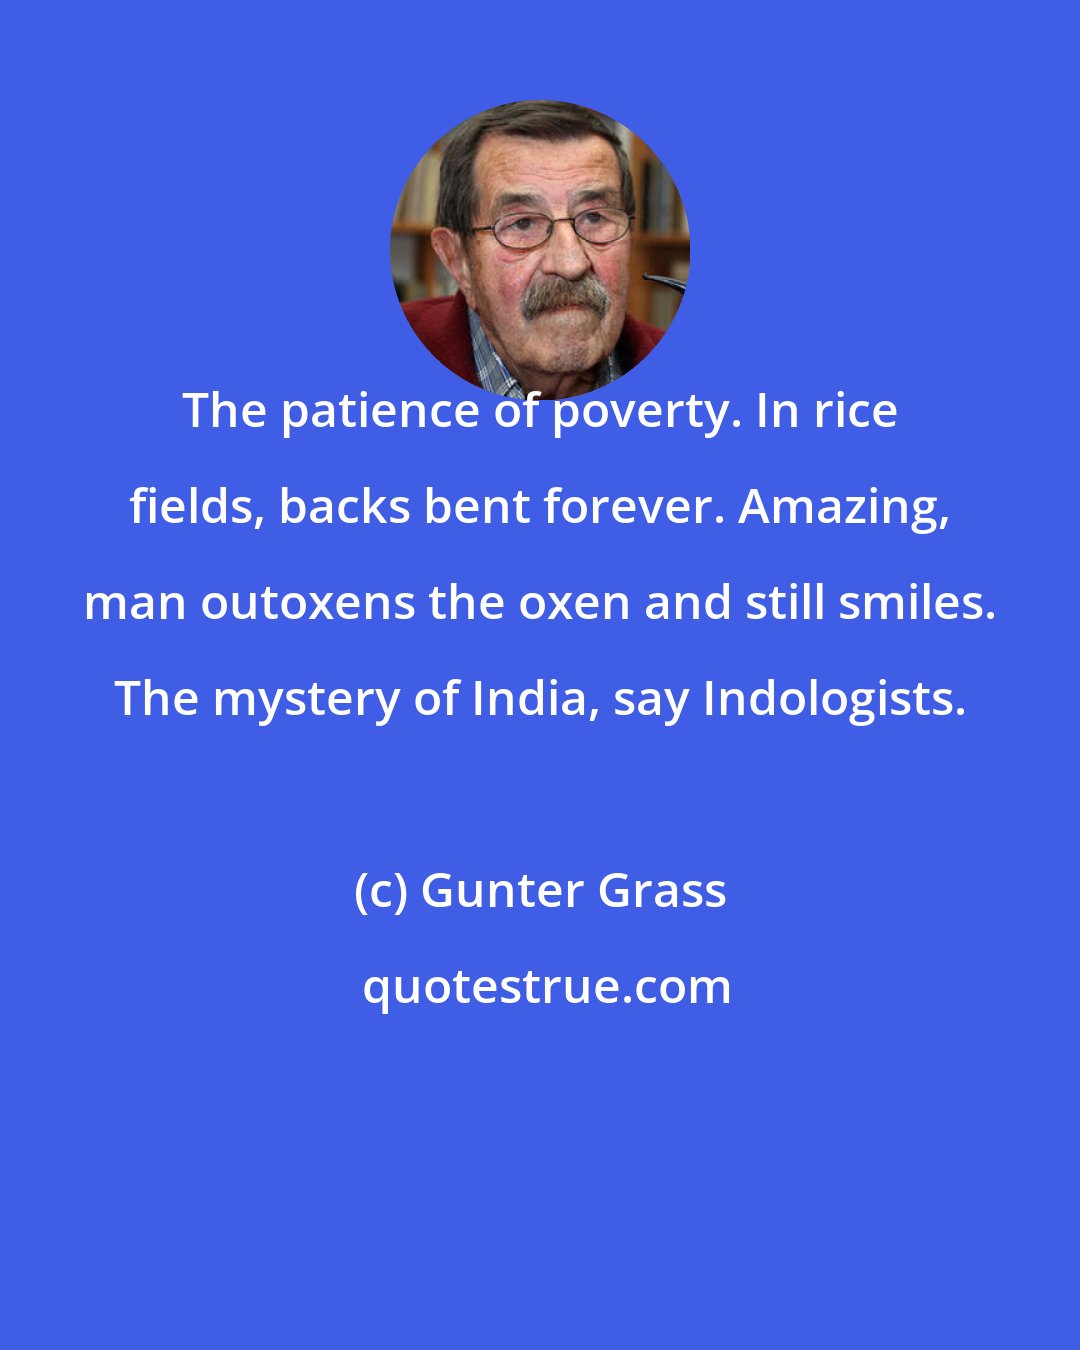 Gunter Grass: The patience of poverty. In rice fields, backs bent forever. Amazing, man outoxens the oxen and still smiles. The mystery of India, say Indologists.